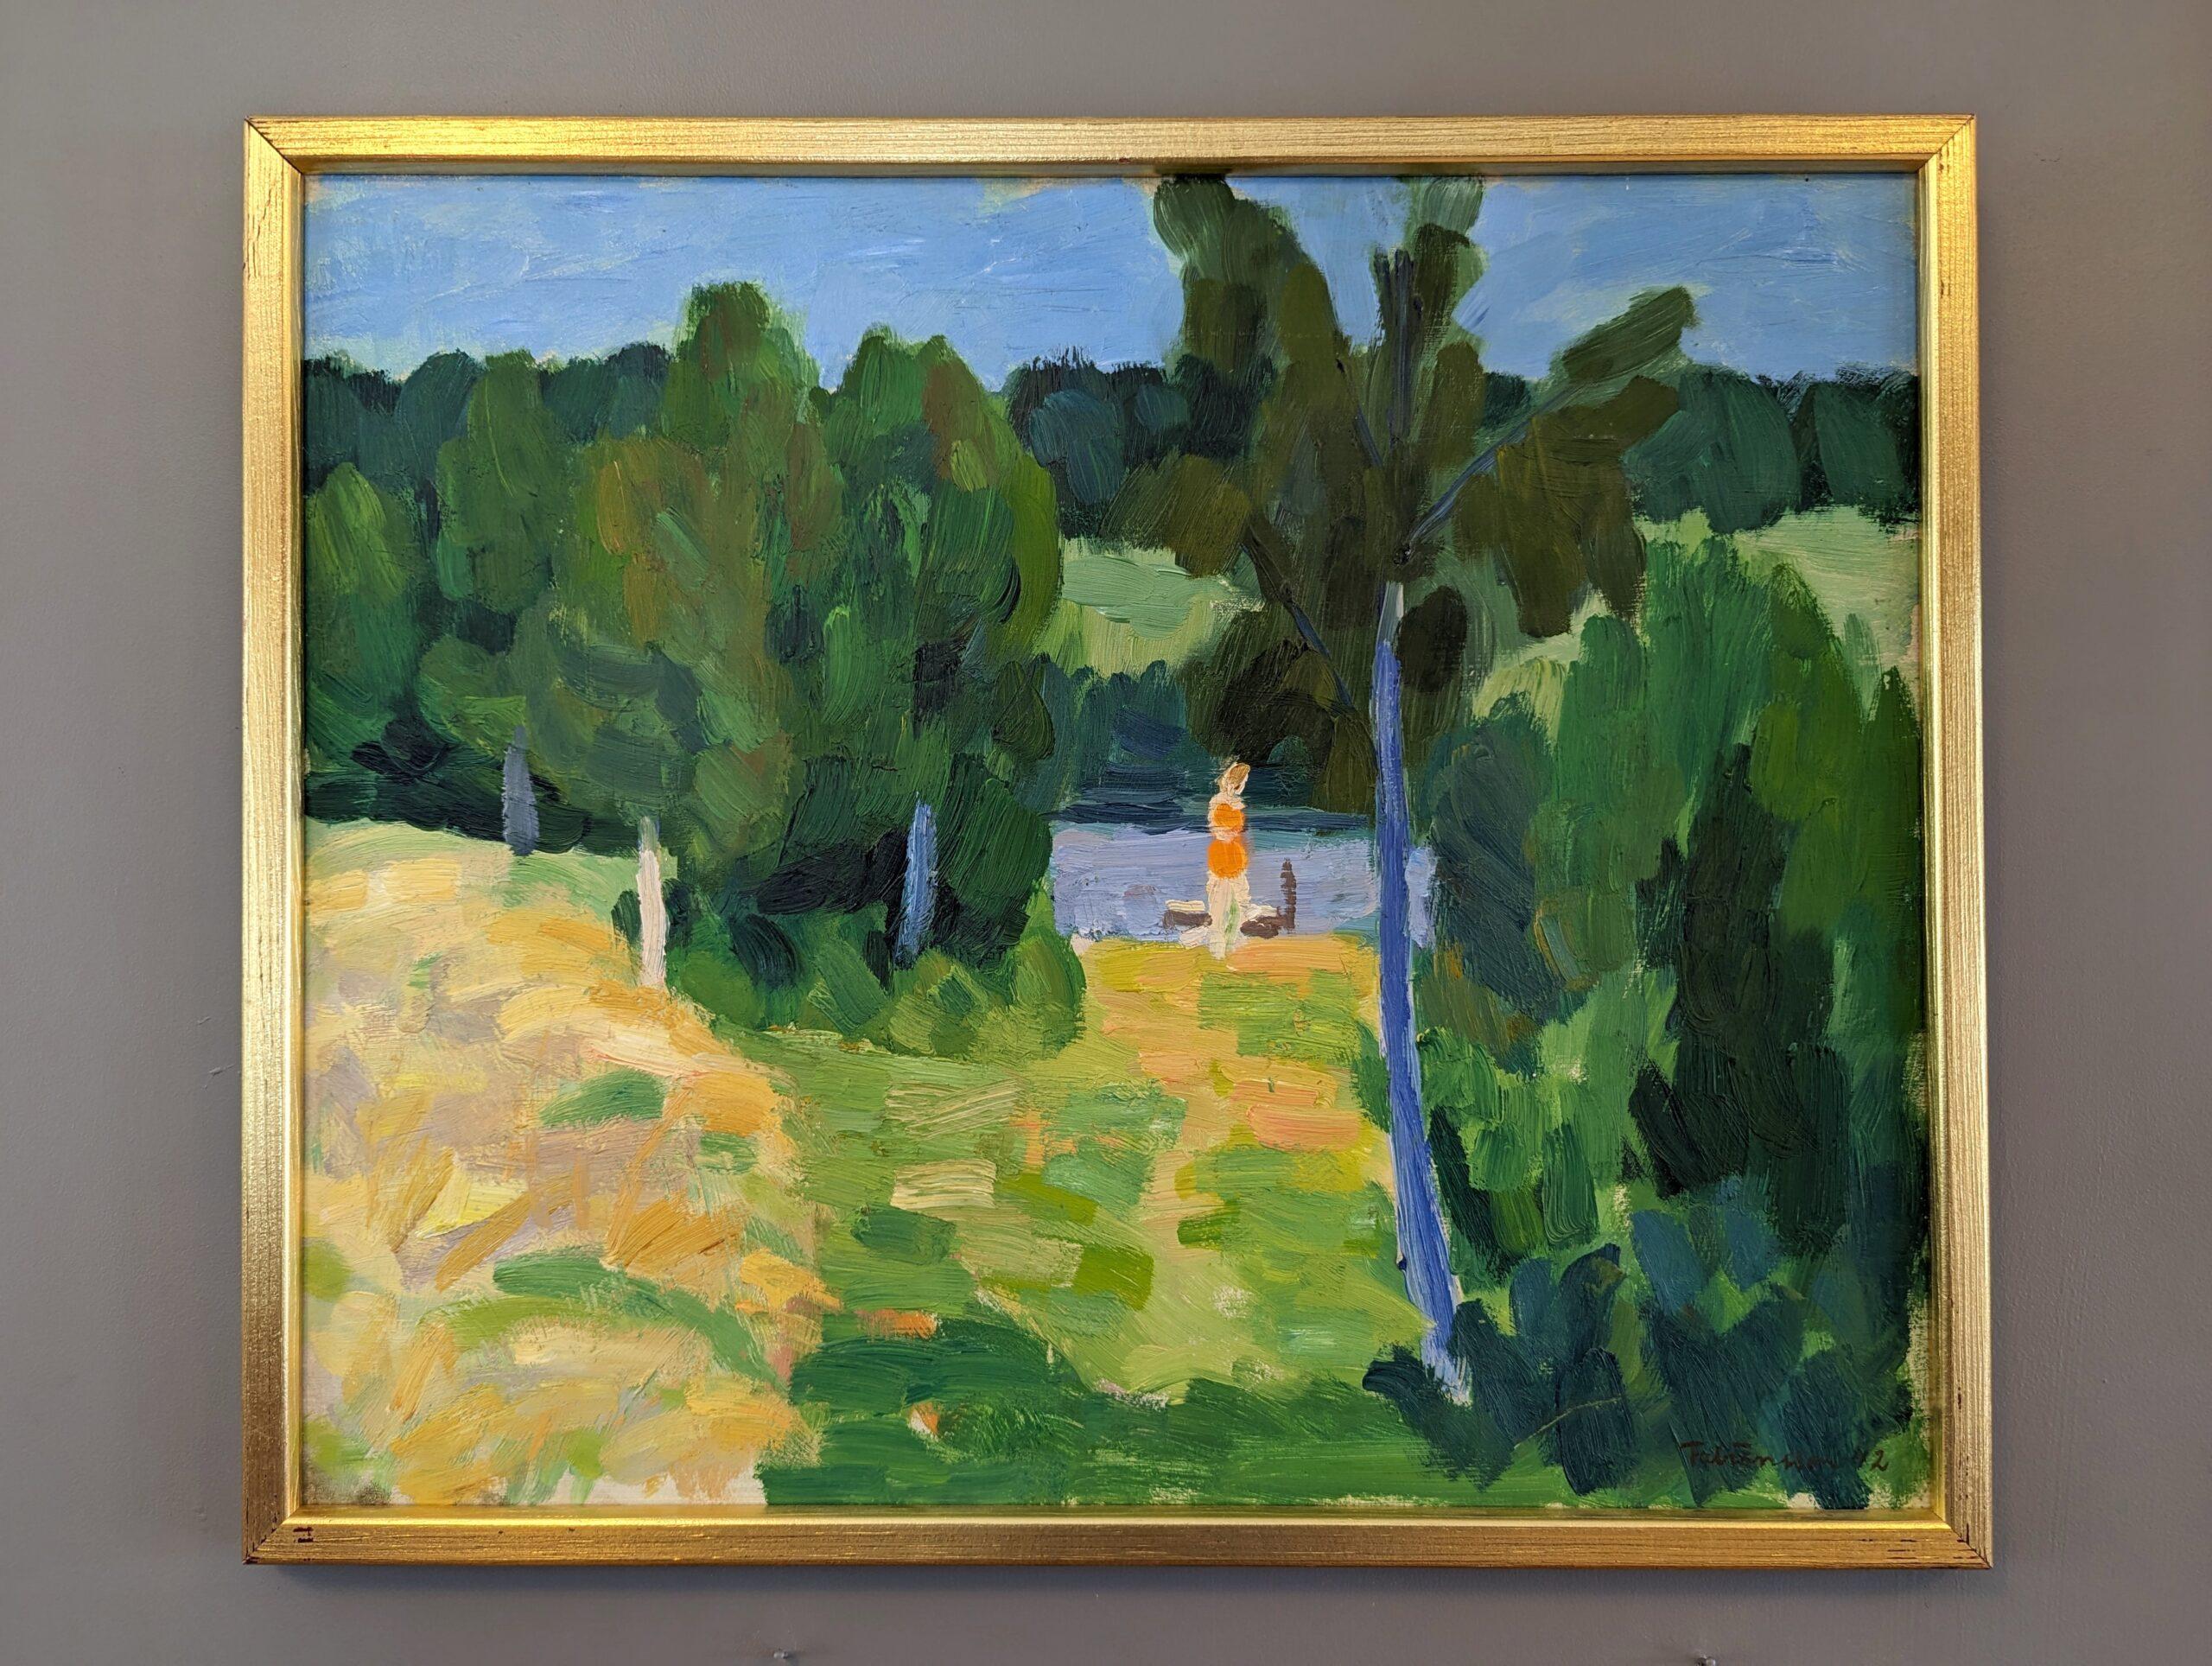 NATURE HIDEOUT
Size: 41 x 49 cm (including frame)
Oil on Board

A wonderfully executed modernist style landscape oil composition, signed and dated 1942 by the established Swedish artist Ture Fabiansson (1910-1994), whose works have been exhibited in